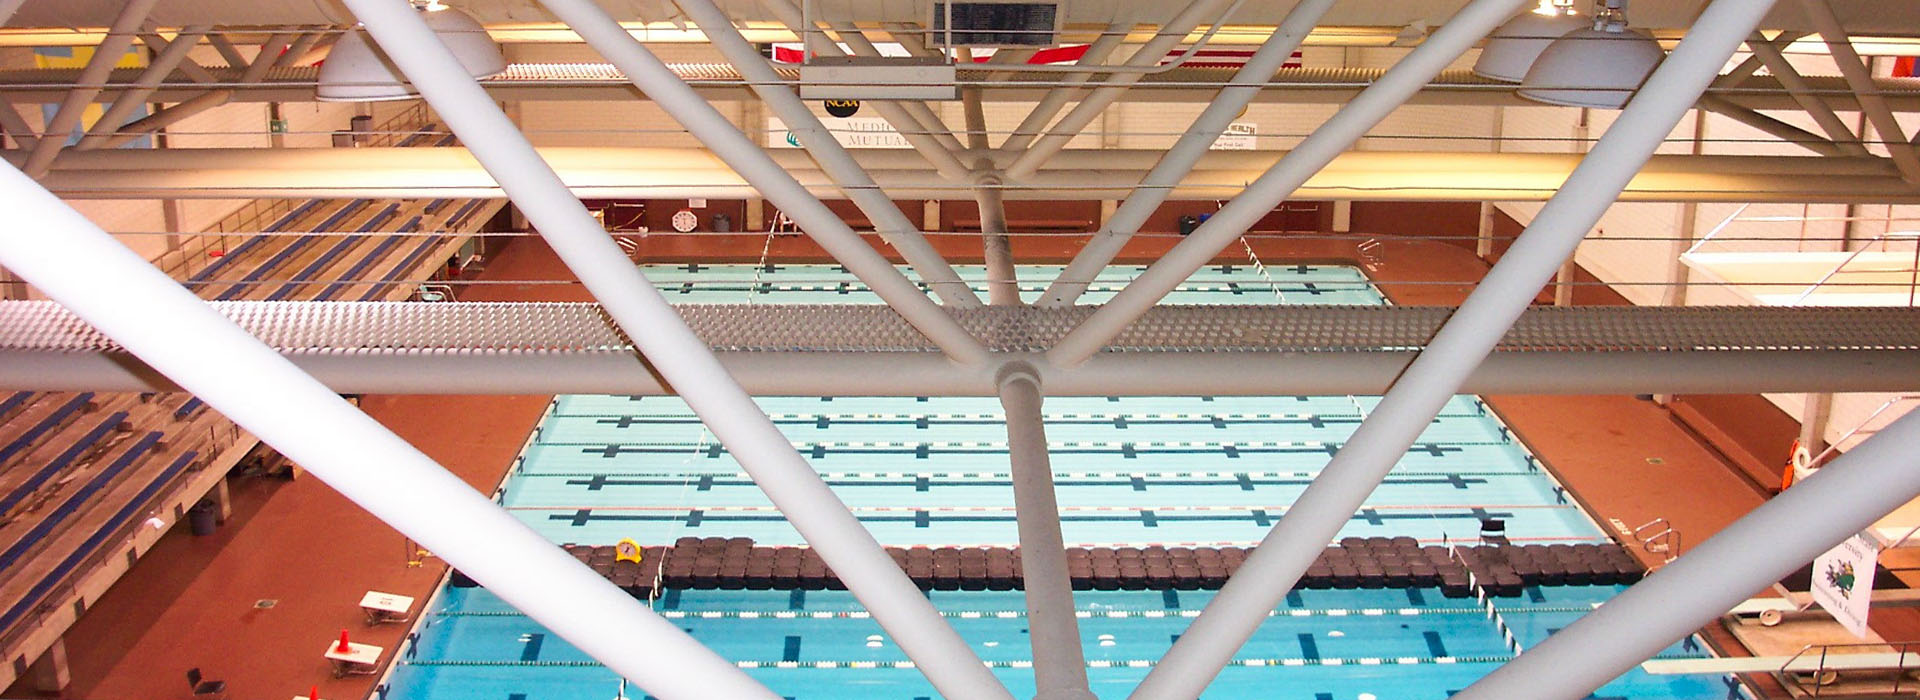 CSU-Pool-Above-Rafters-1920x700